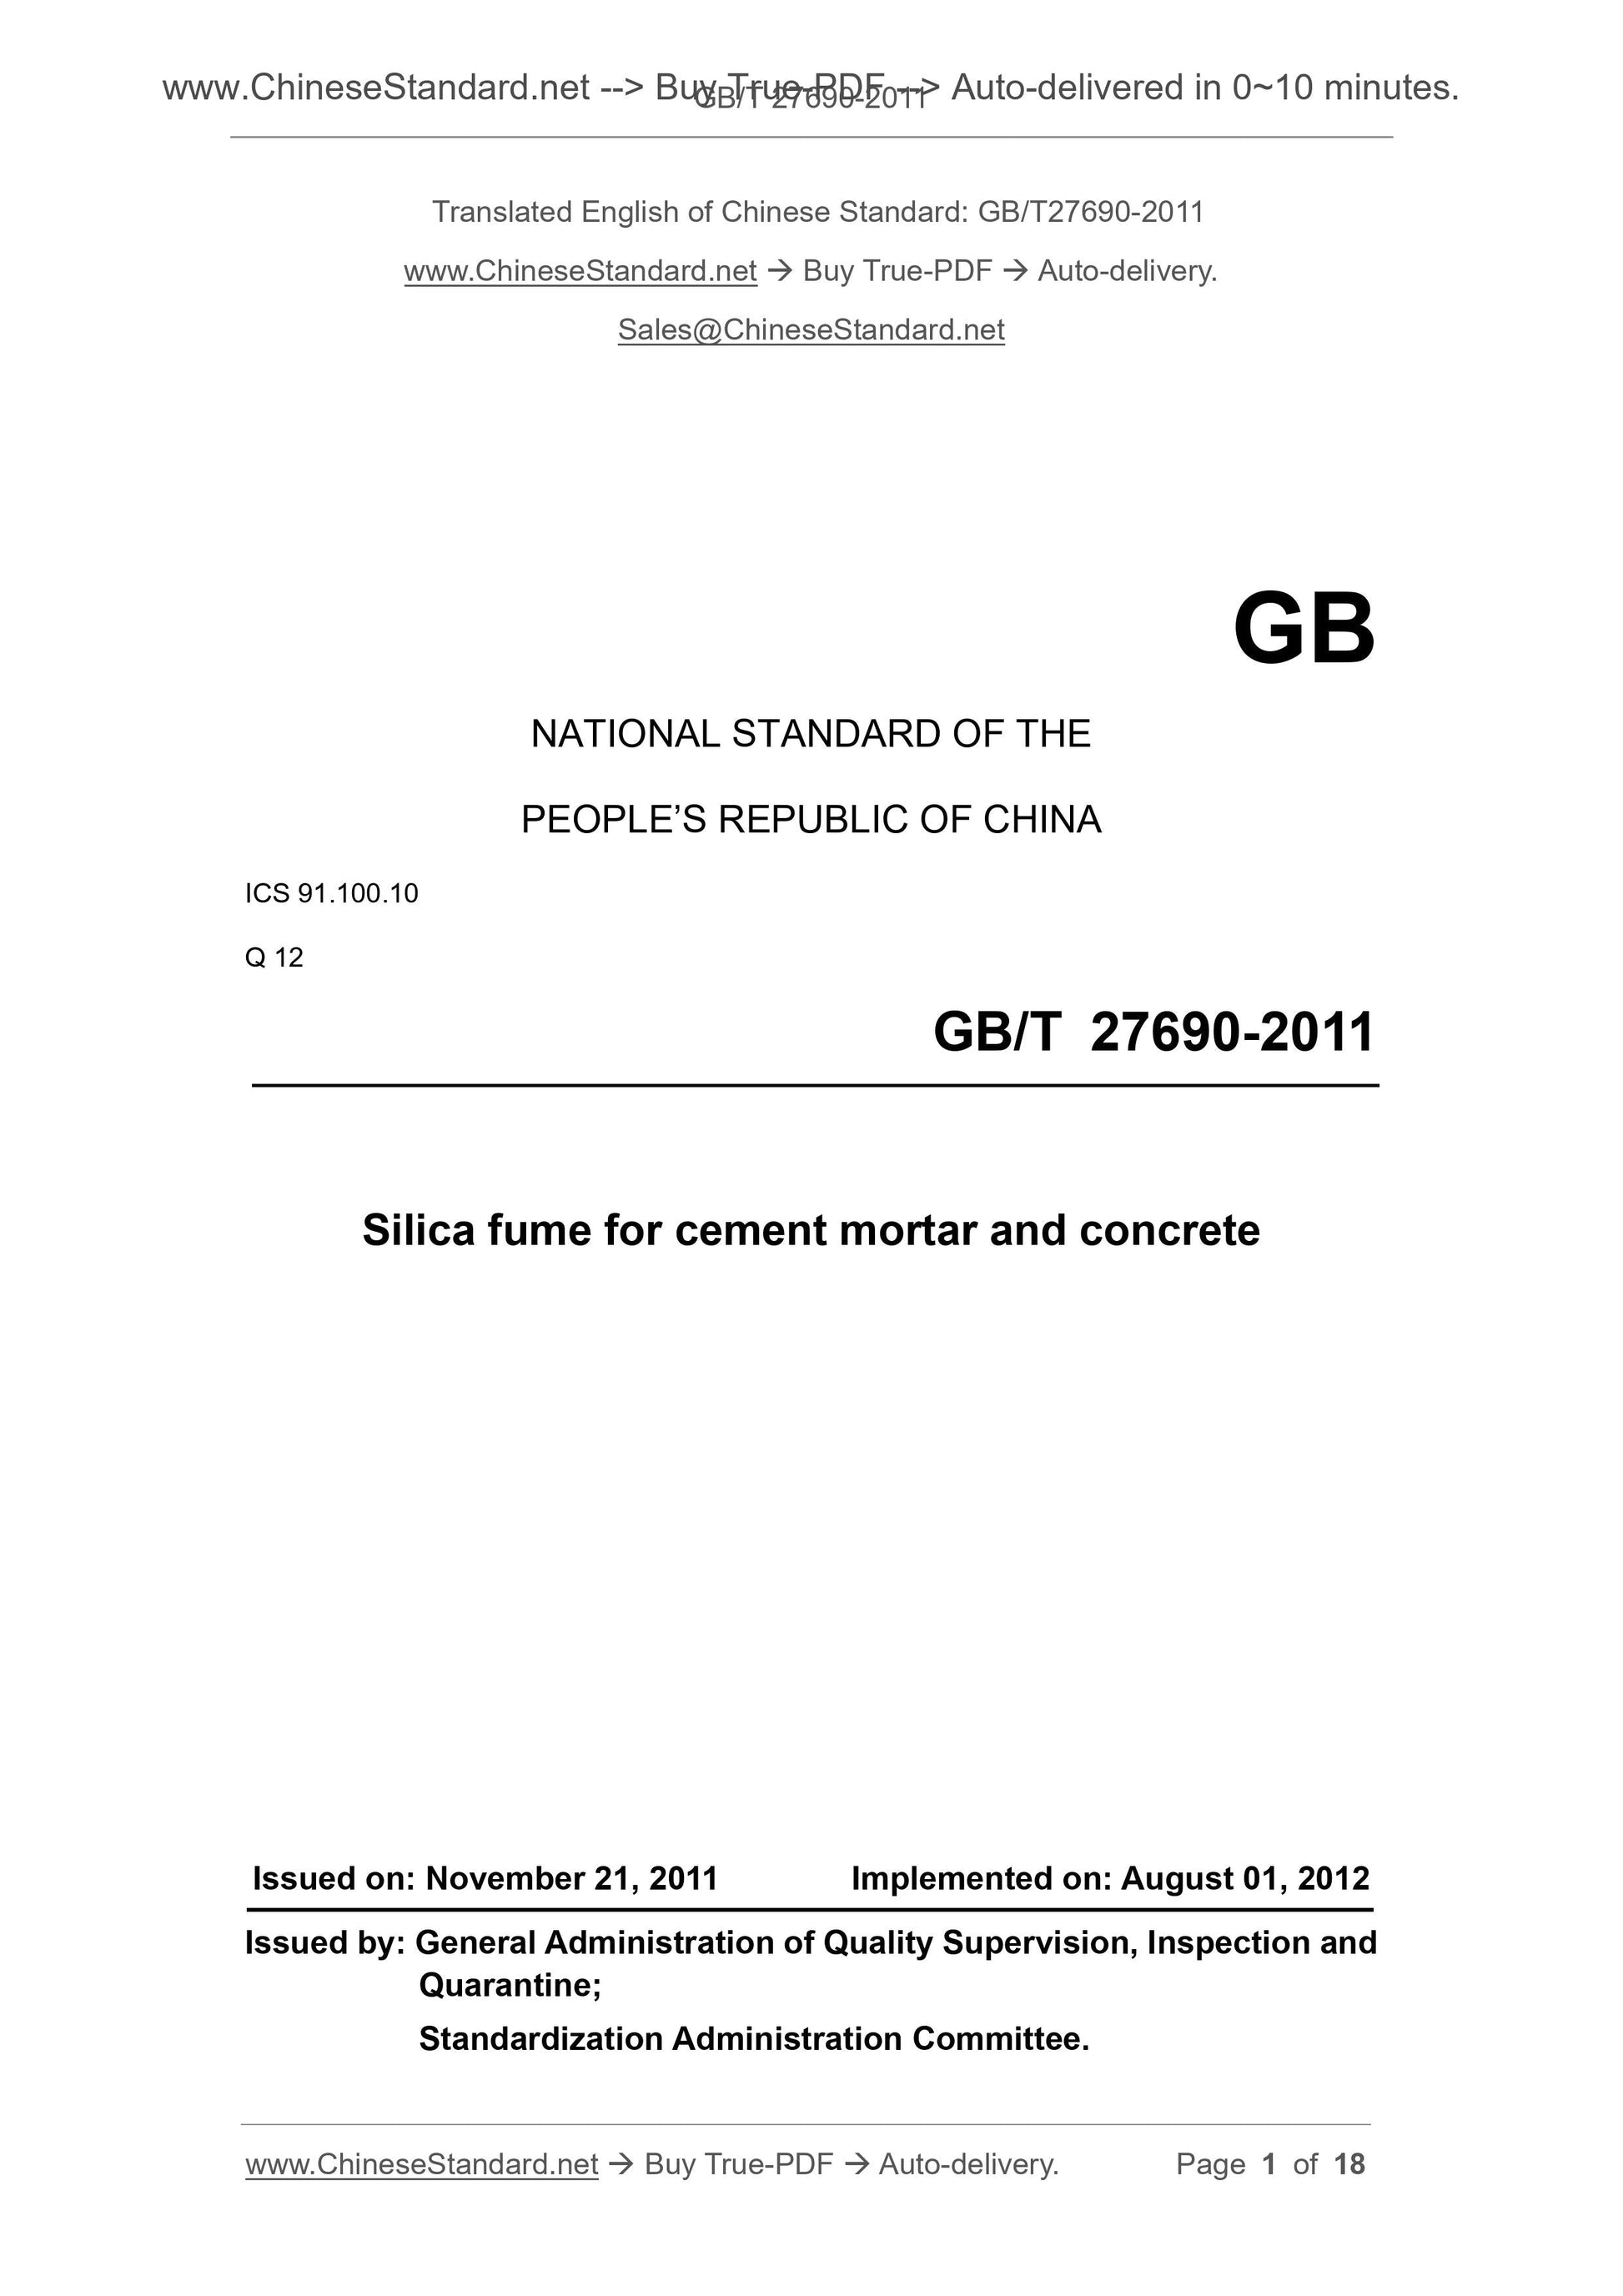 GB/T 27690-2011 Page 1